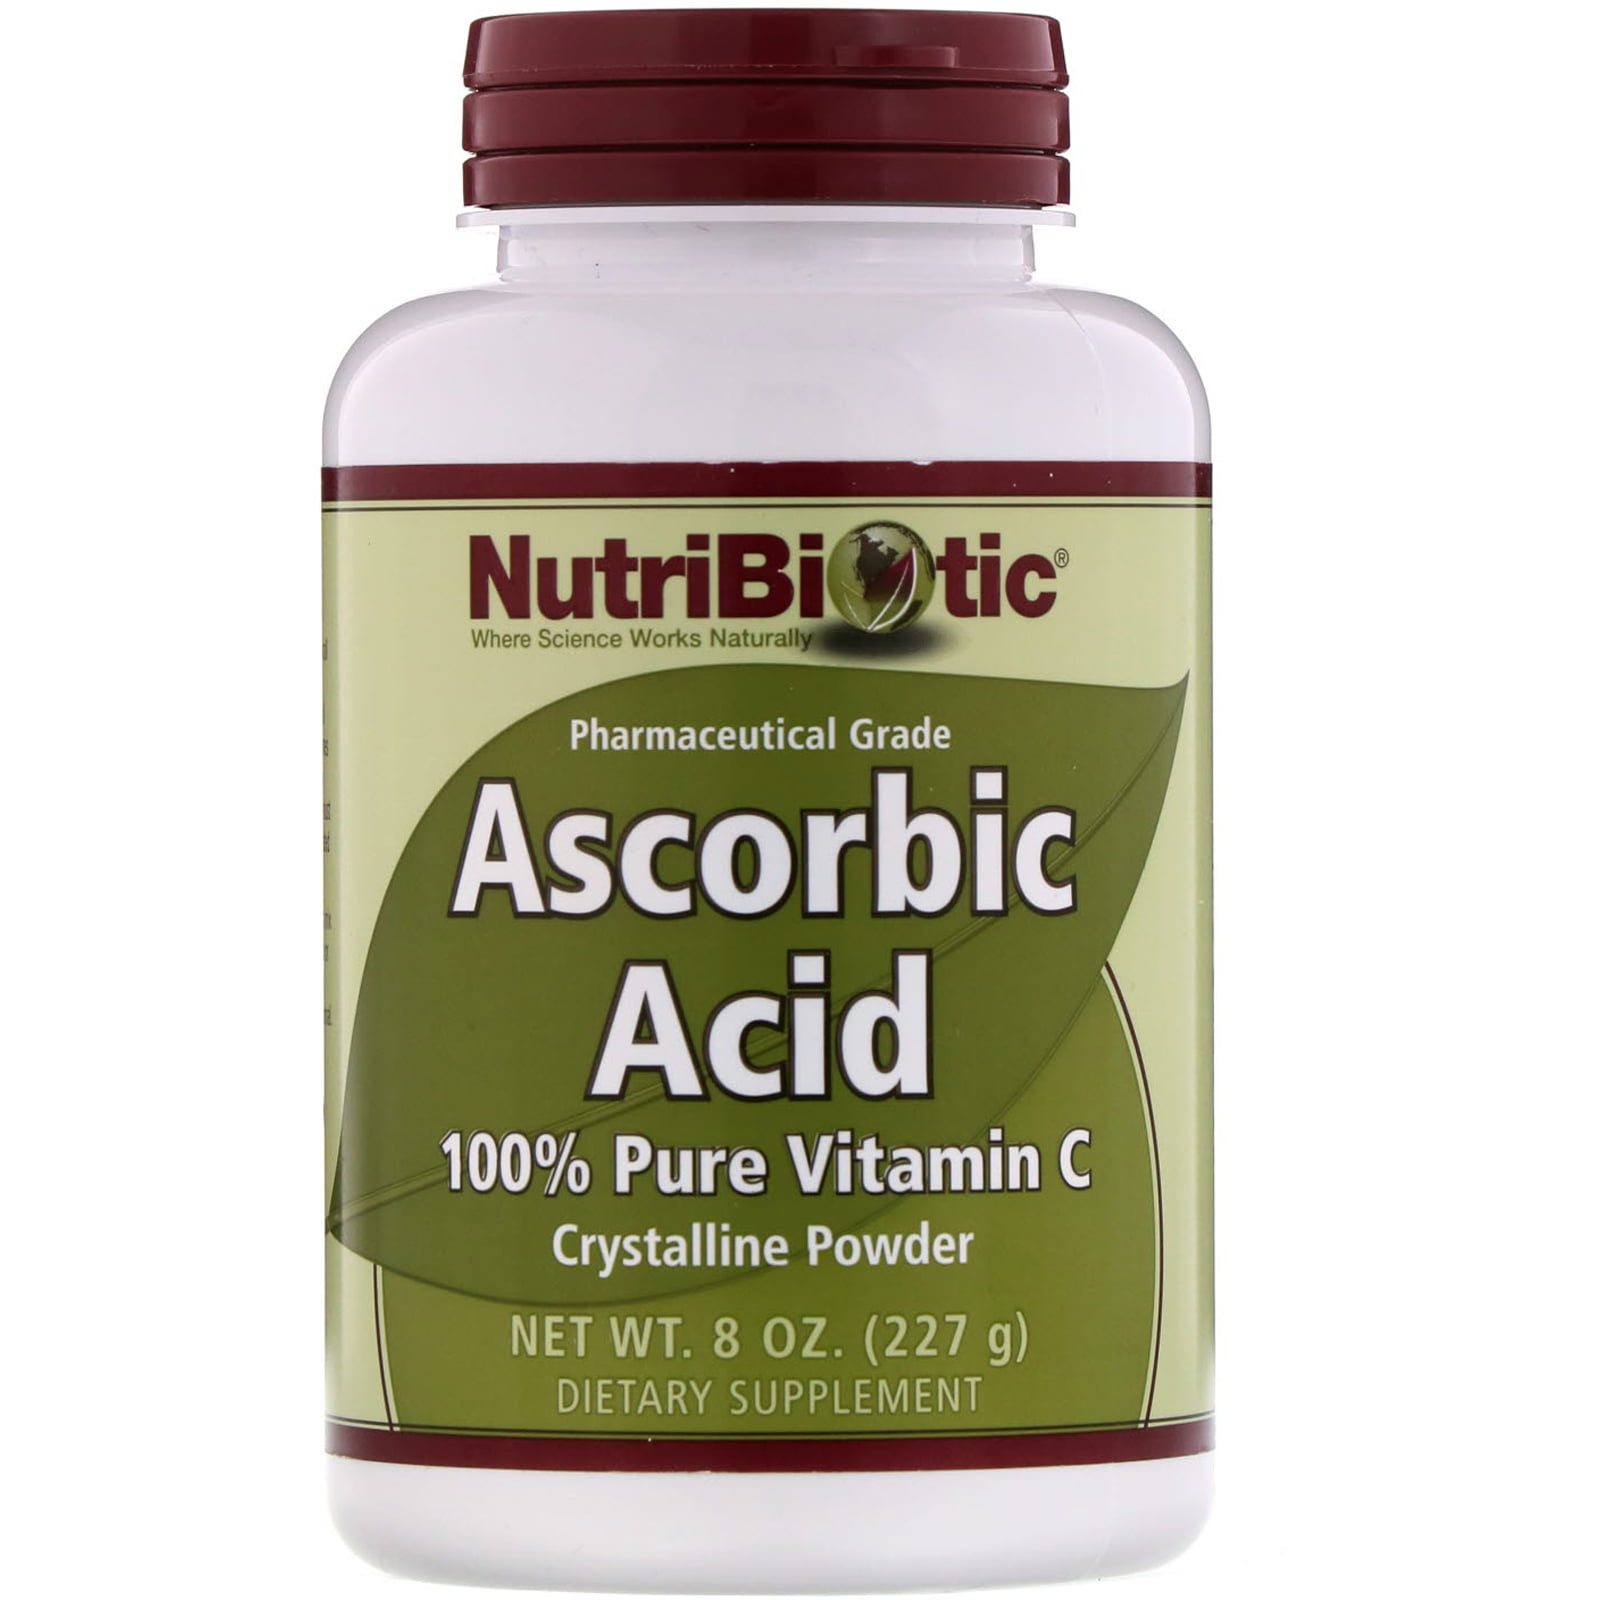 is ascorbic acid in baby food safe